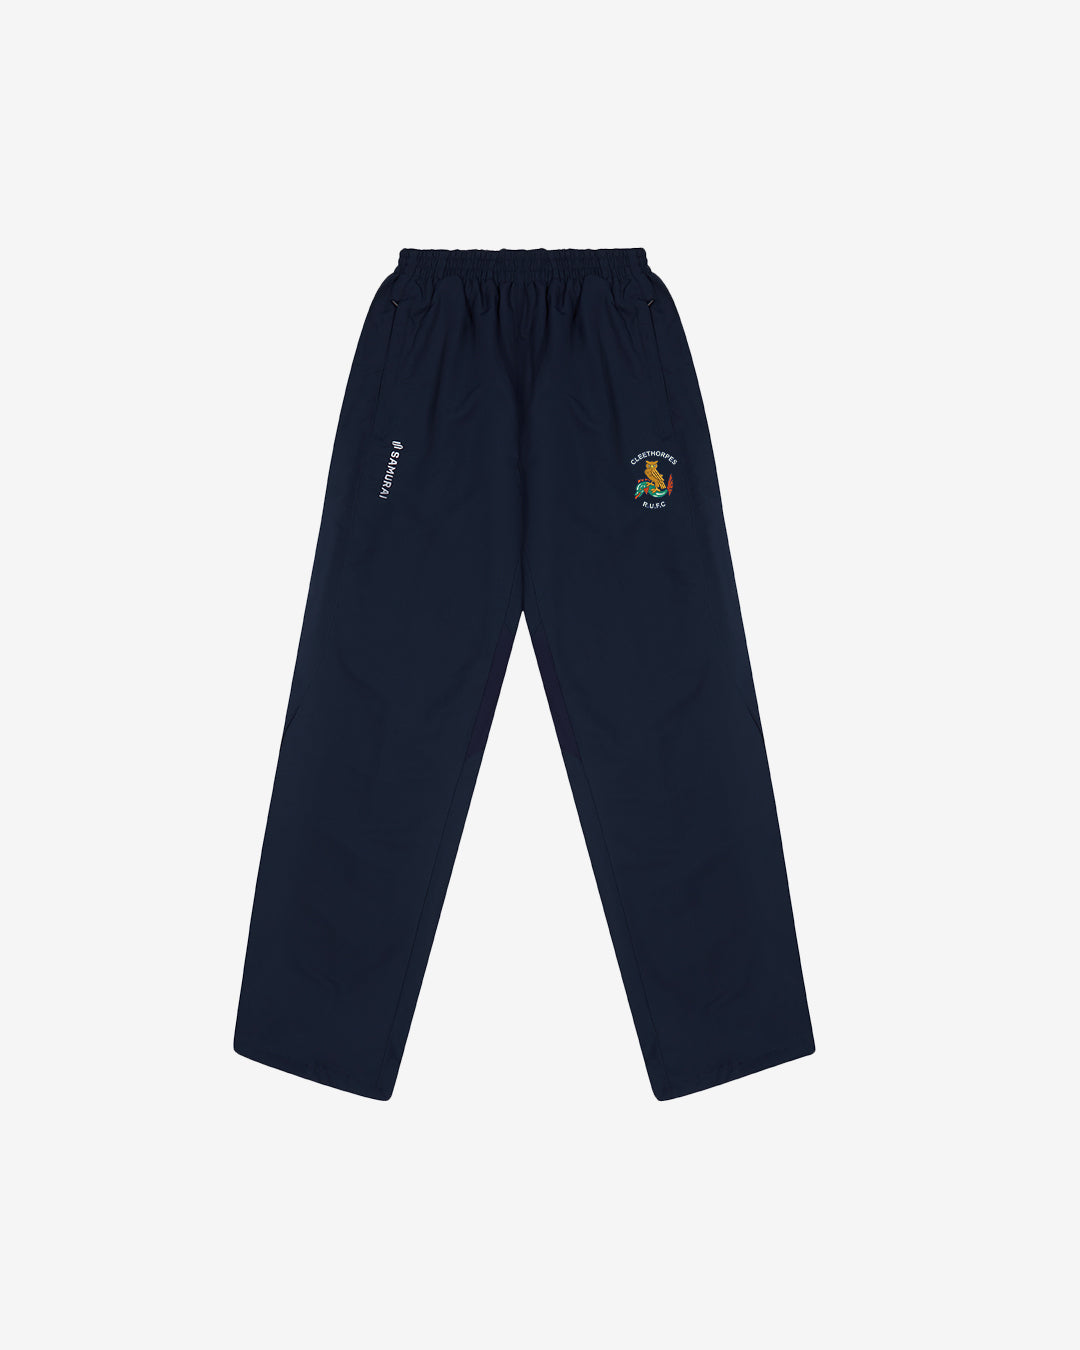 Cleethorpes RUFC - EP:0127 - Active Pant - Navy